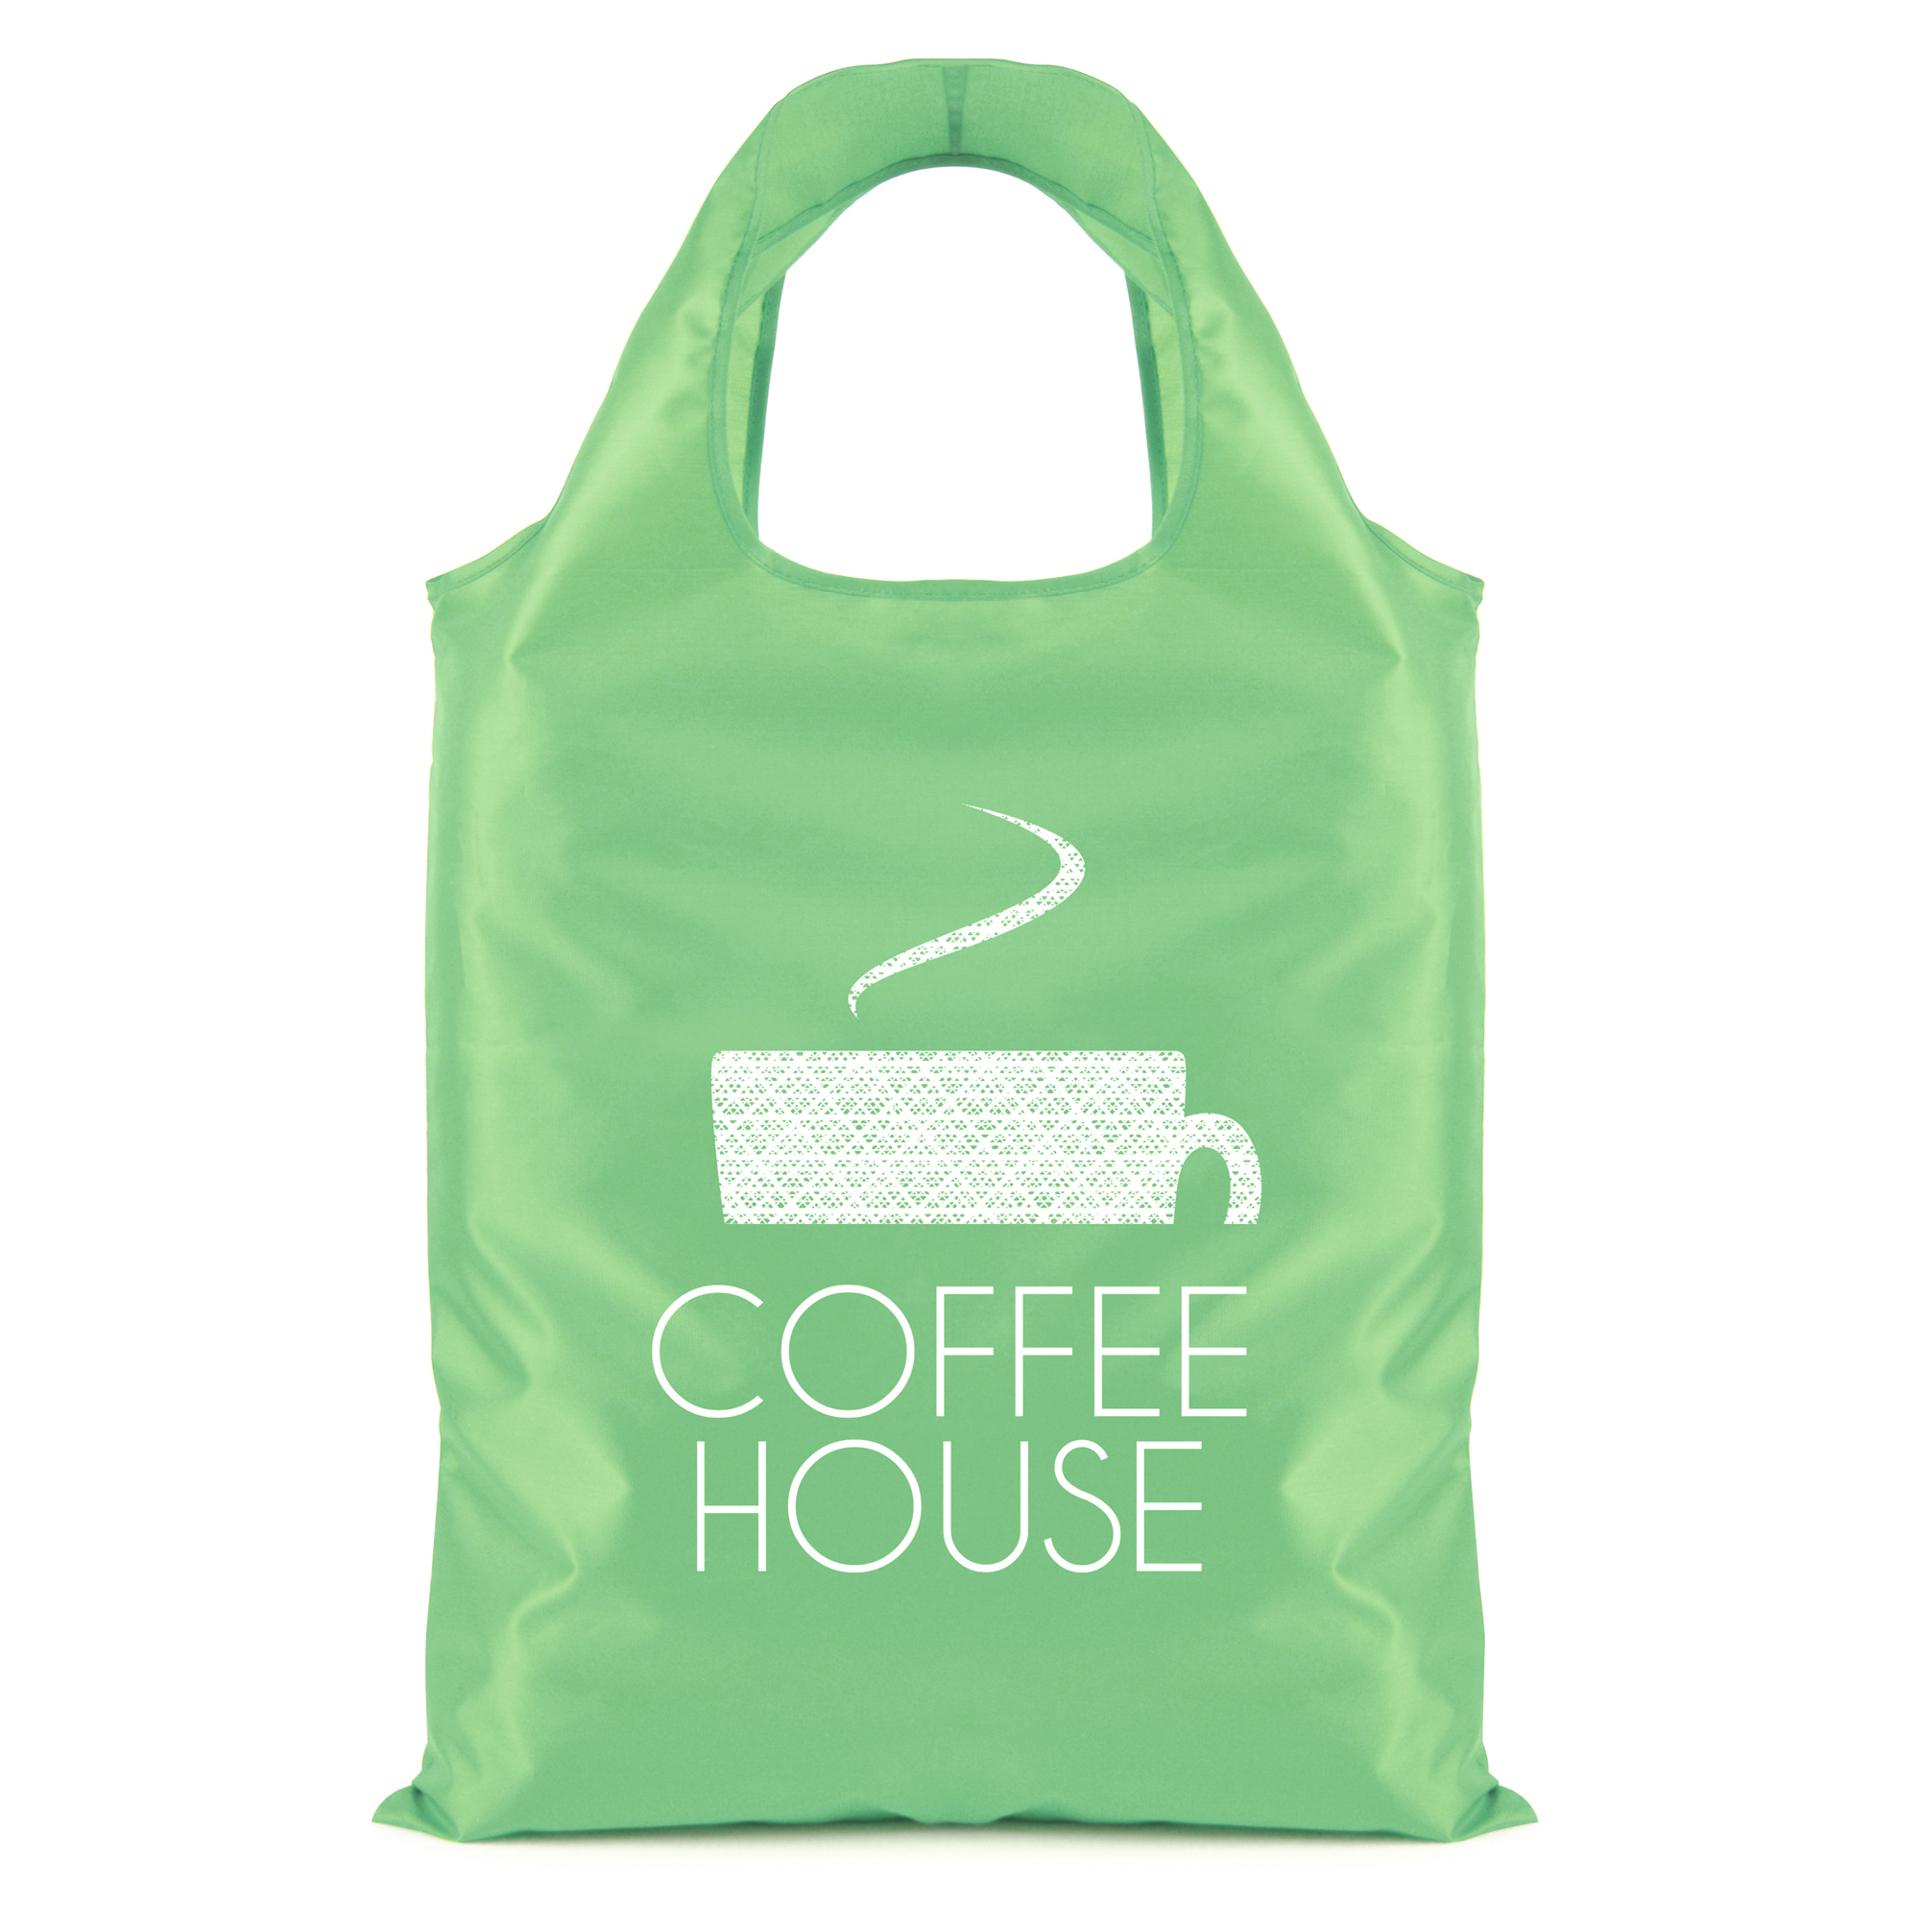 green folding bag with a logo printed on one side